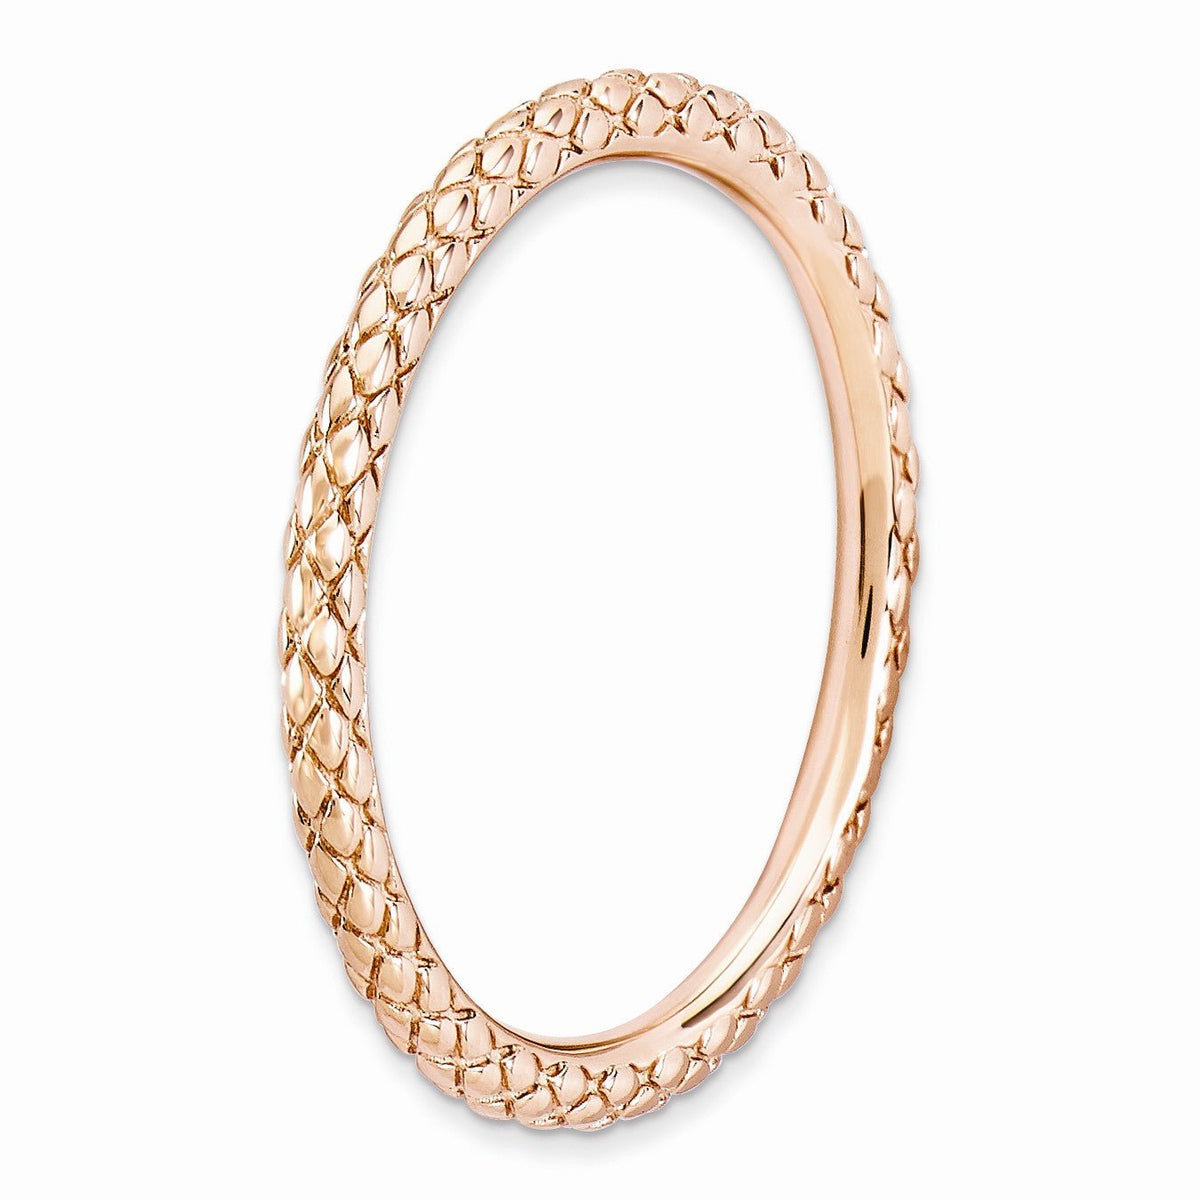 Alternate view of the 1.5mm Stackable 14K Rose Gold Plated Silver Crisscross Band by The Black Bow Jewelry Co.